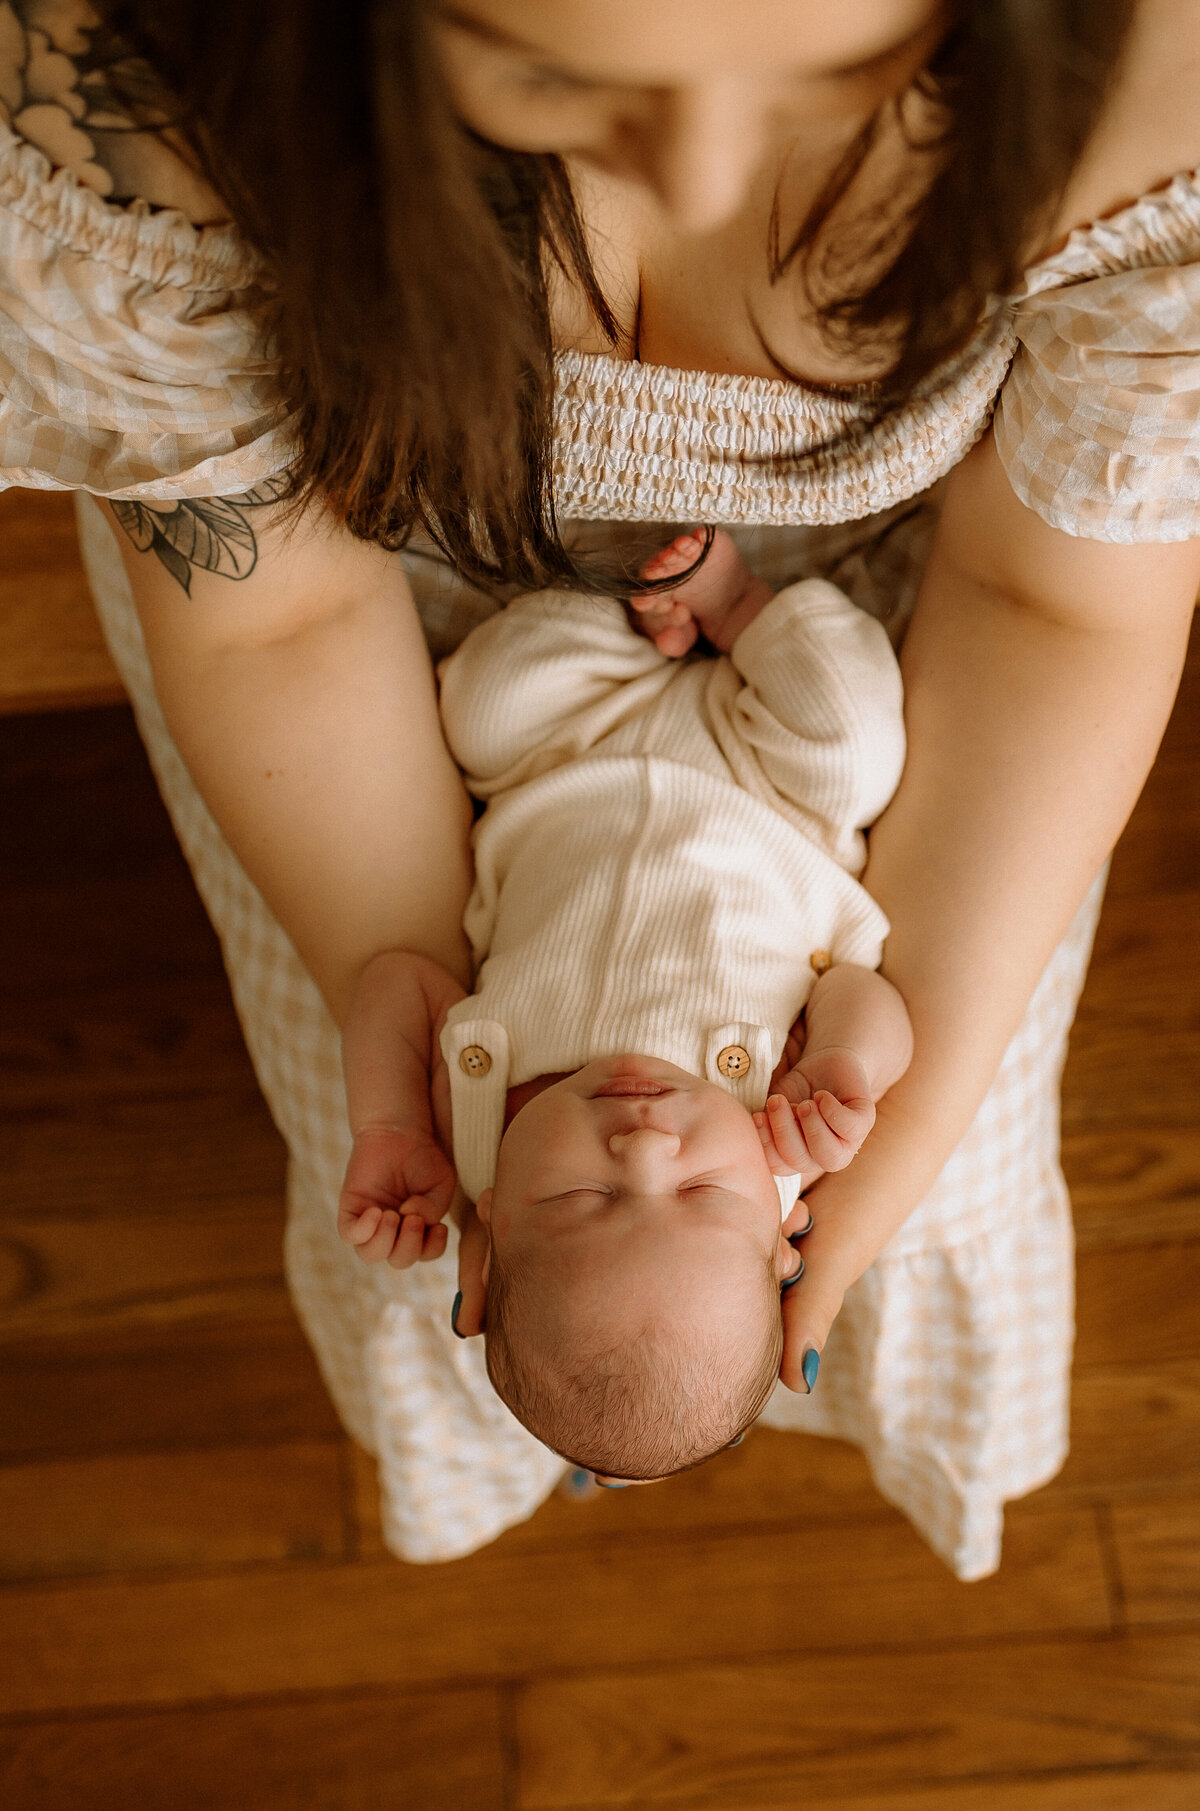 Celebrate the wonder of your life's newest miracle with my newborn photography in Calgary. Let's capture the beauty, awe, and innocence of your baby